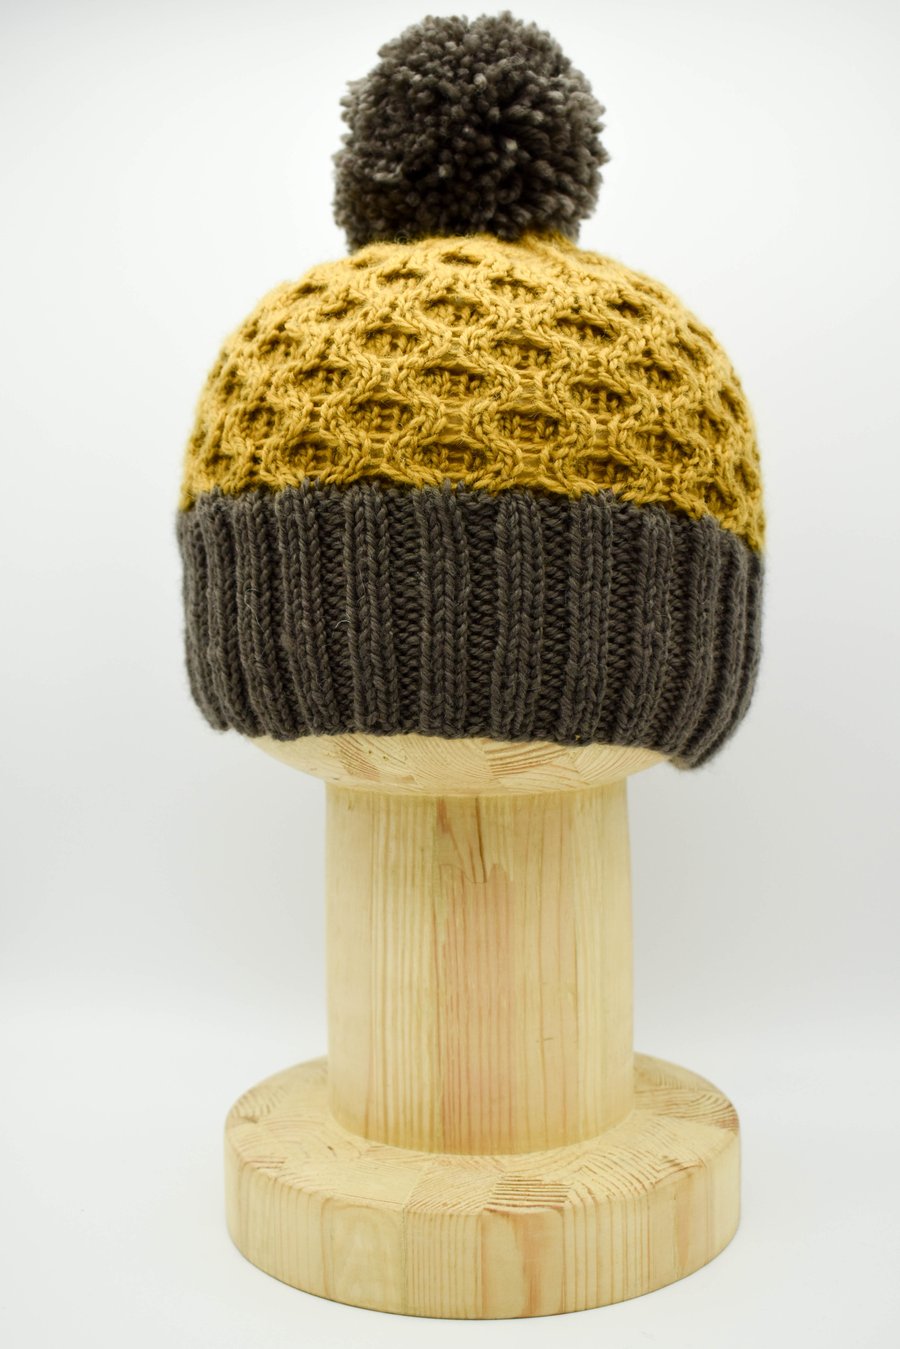 Hand Knitted "Honeycomb" Pom-pom hat in ochre and grey-brown